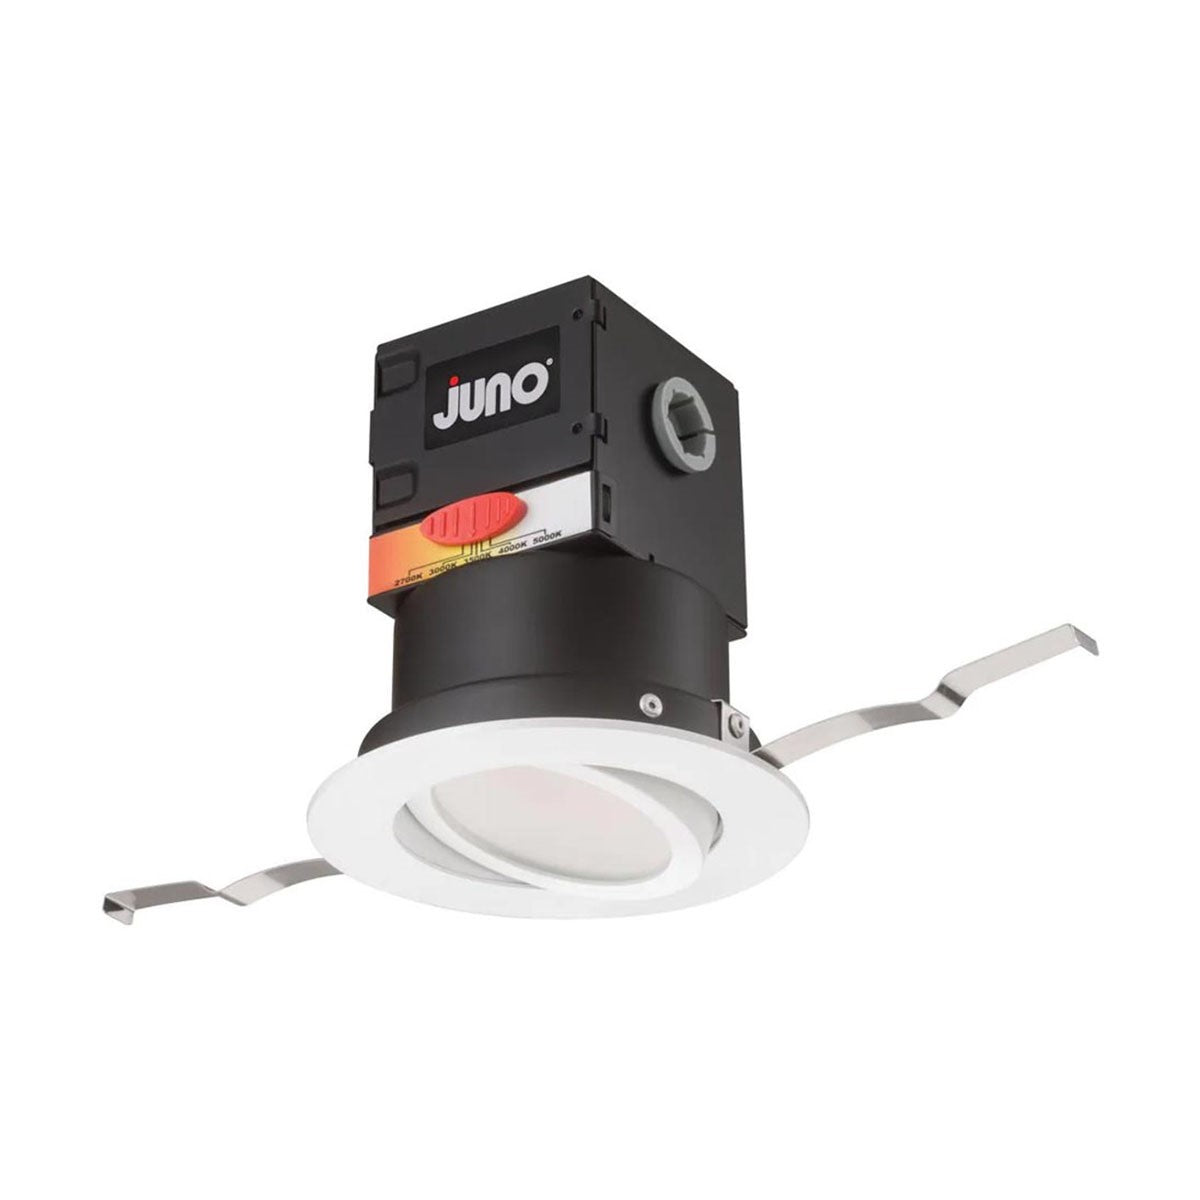 Juno OneUP Canless LED Recessed Light, 4 Inch, 12 Watt, 860 Lumens, Selectable CCT, 2700K to 5000K, Adjustable Trim, White Finish